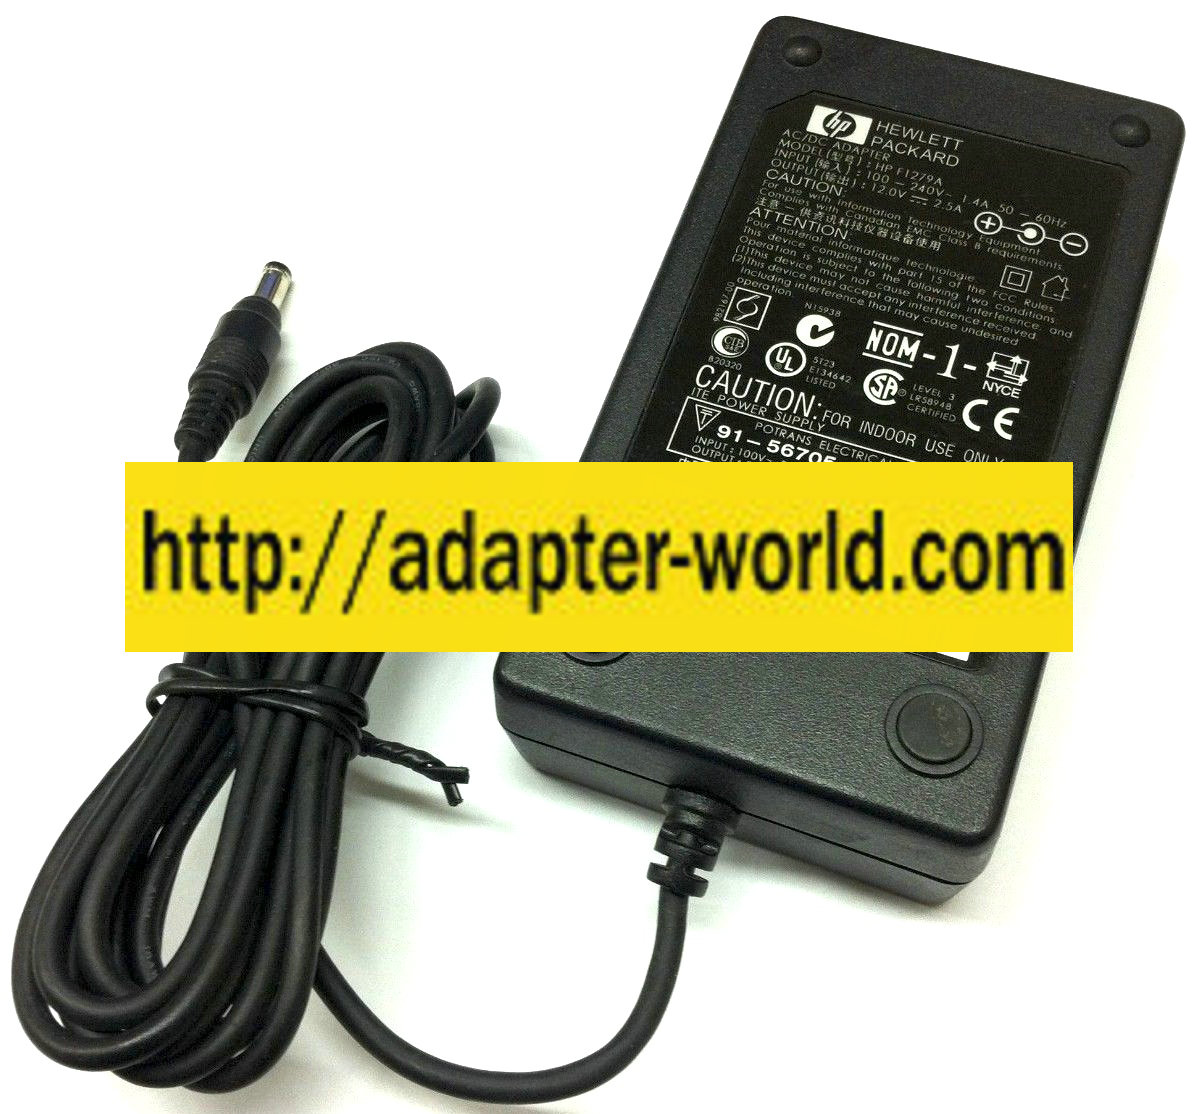 HP F1279A AC ADAPTER 12VDC 2.5A NEW -( ) 2x4.8mm STRAIGHT